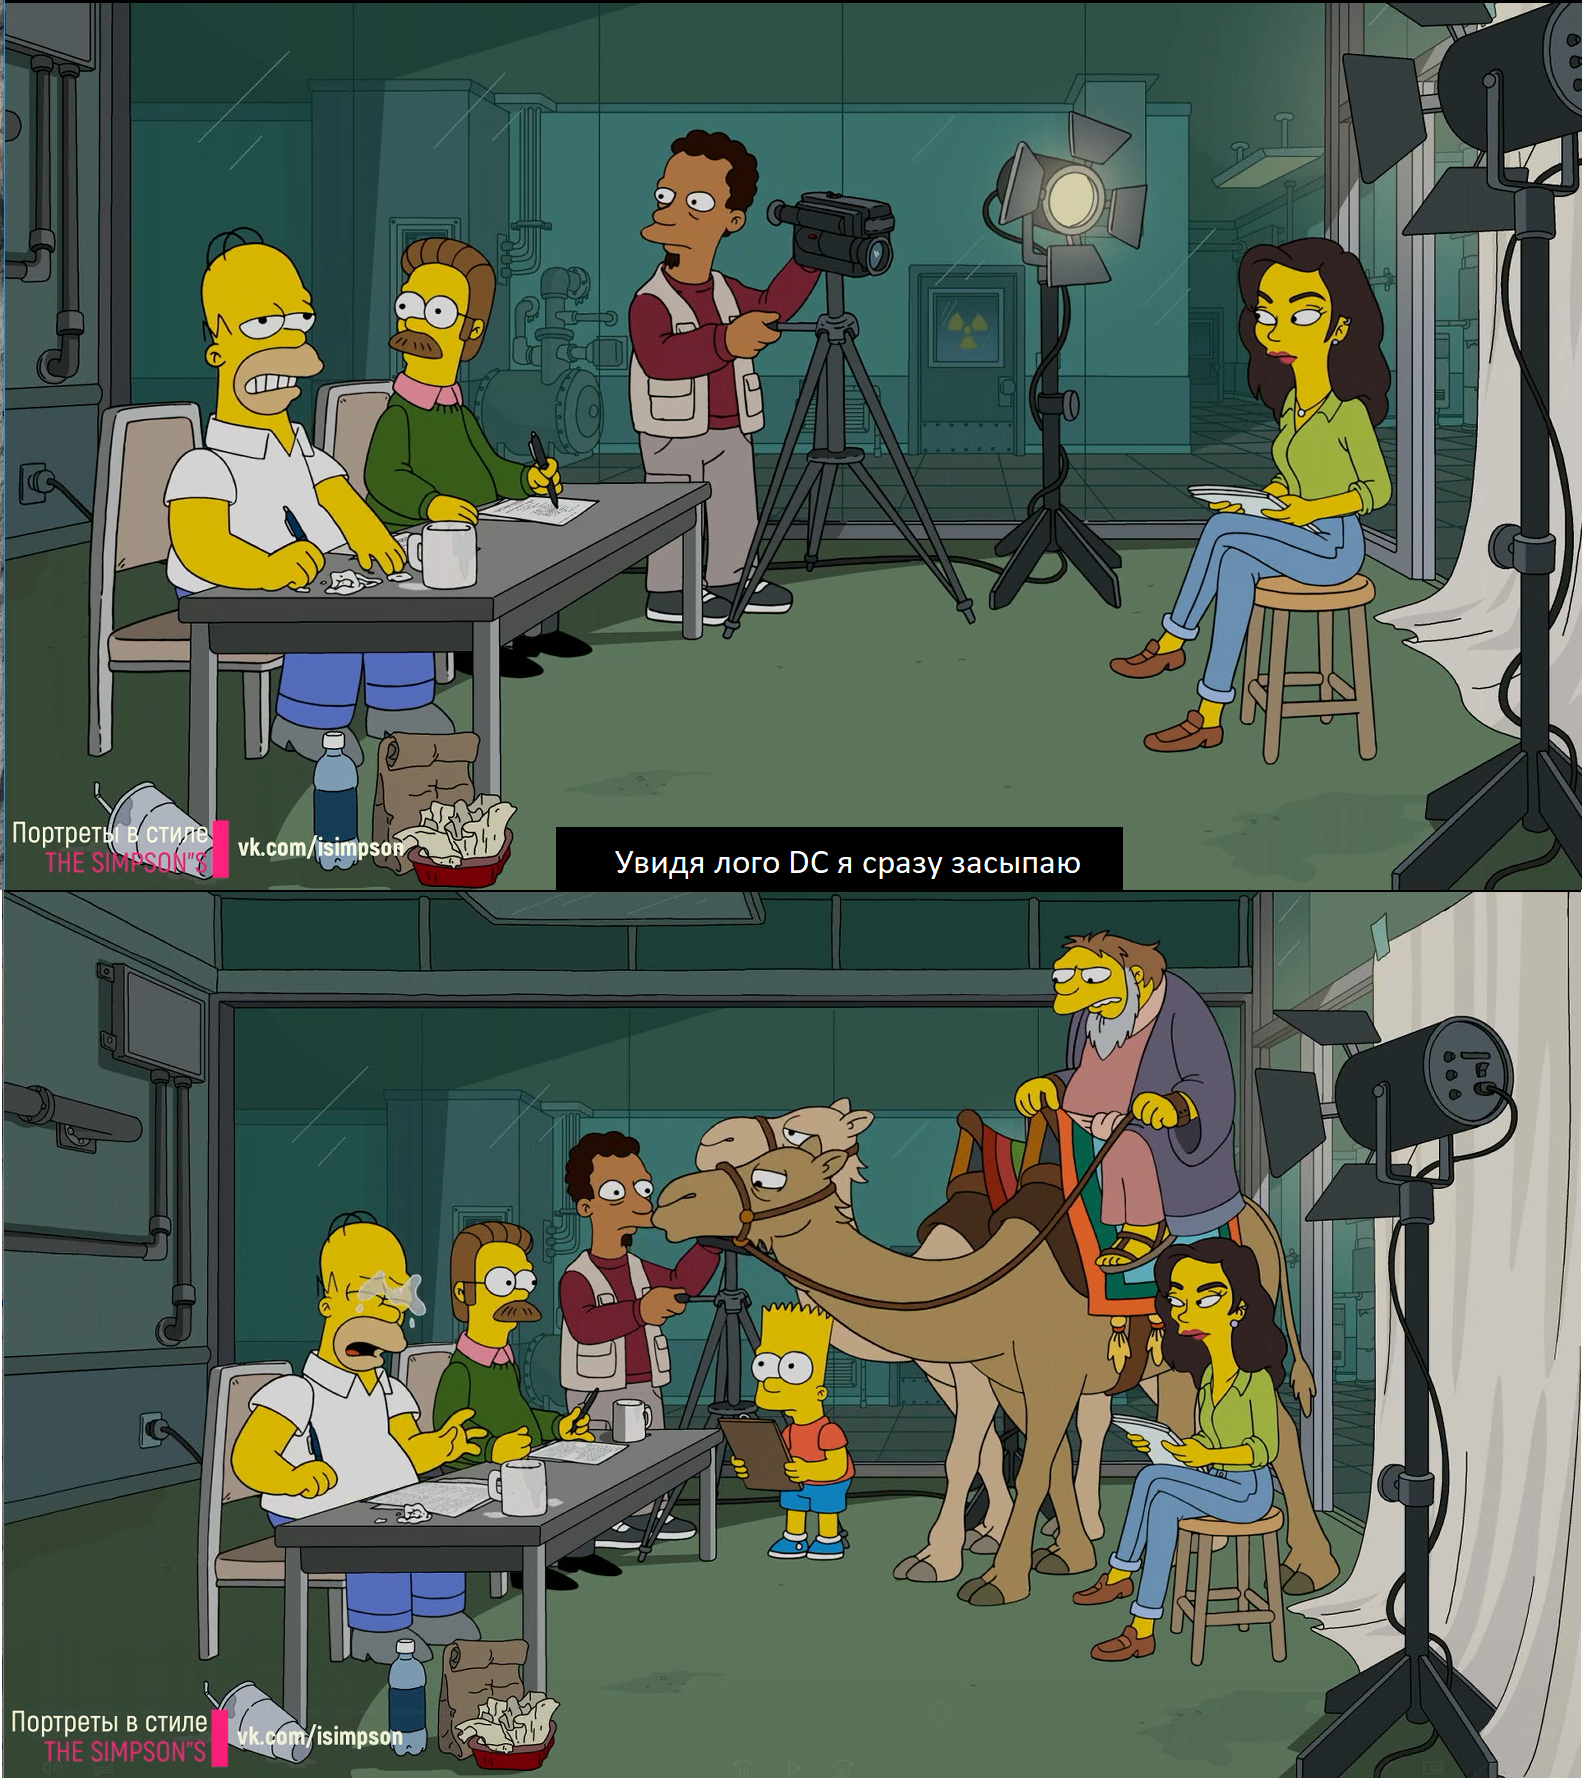 When even a camel disagrees with you - My, The Simpsons, Dc comics, New episode, Homer Simpson, Bart Simpson, Ned Flanders, Studio, Camels